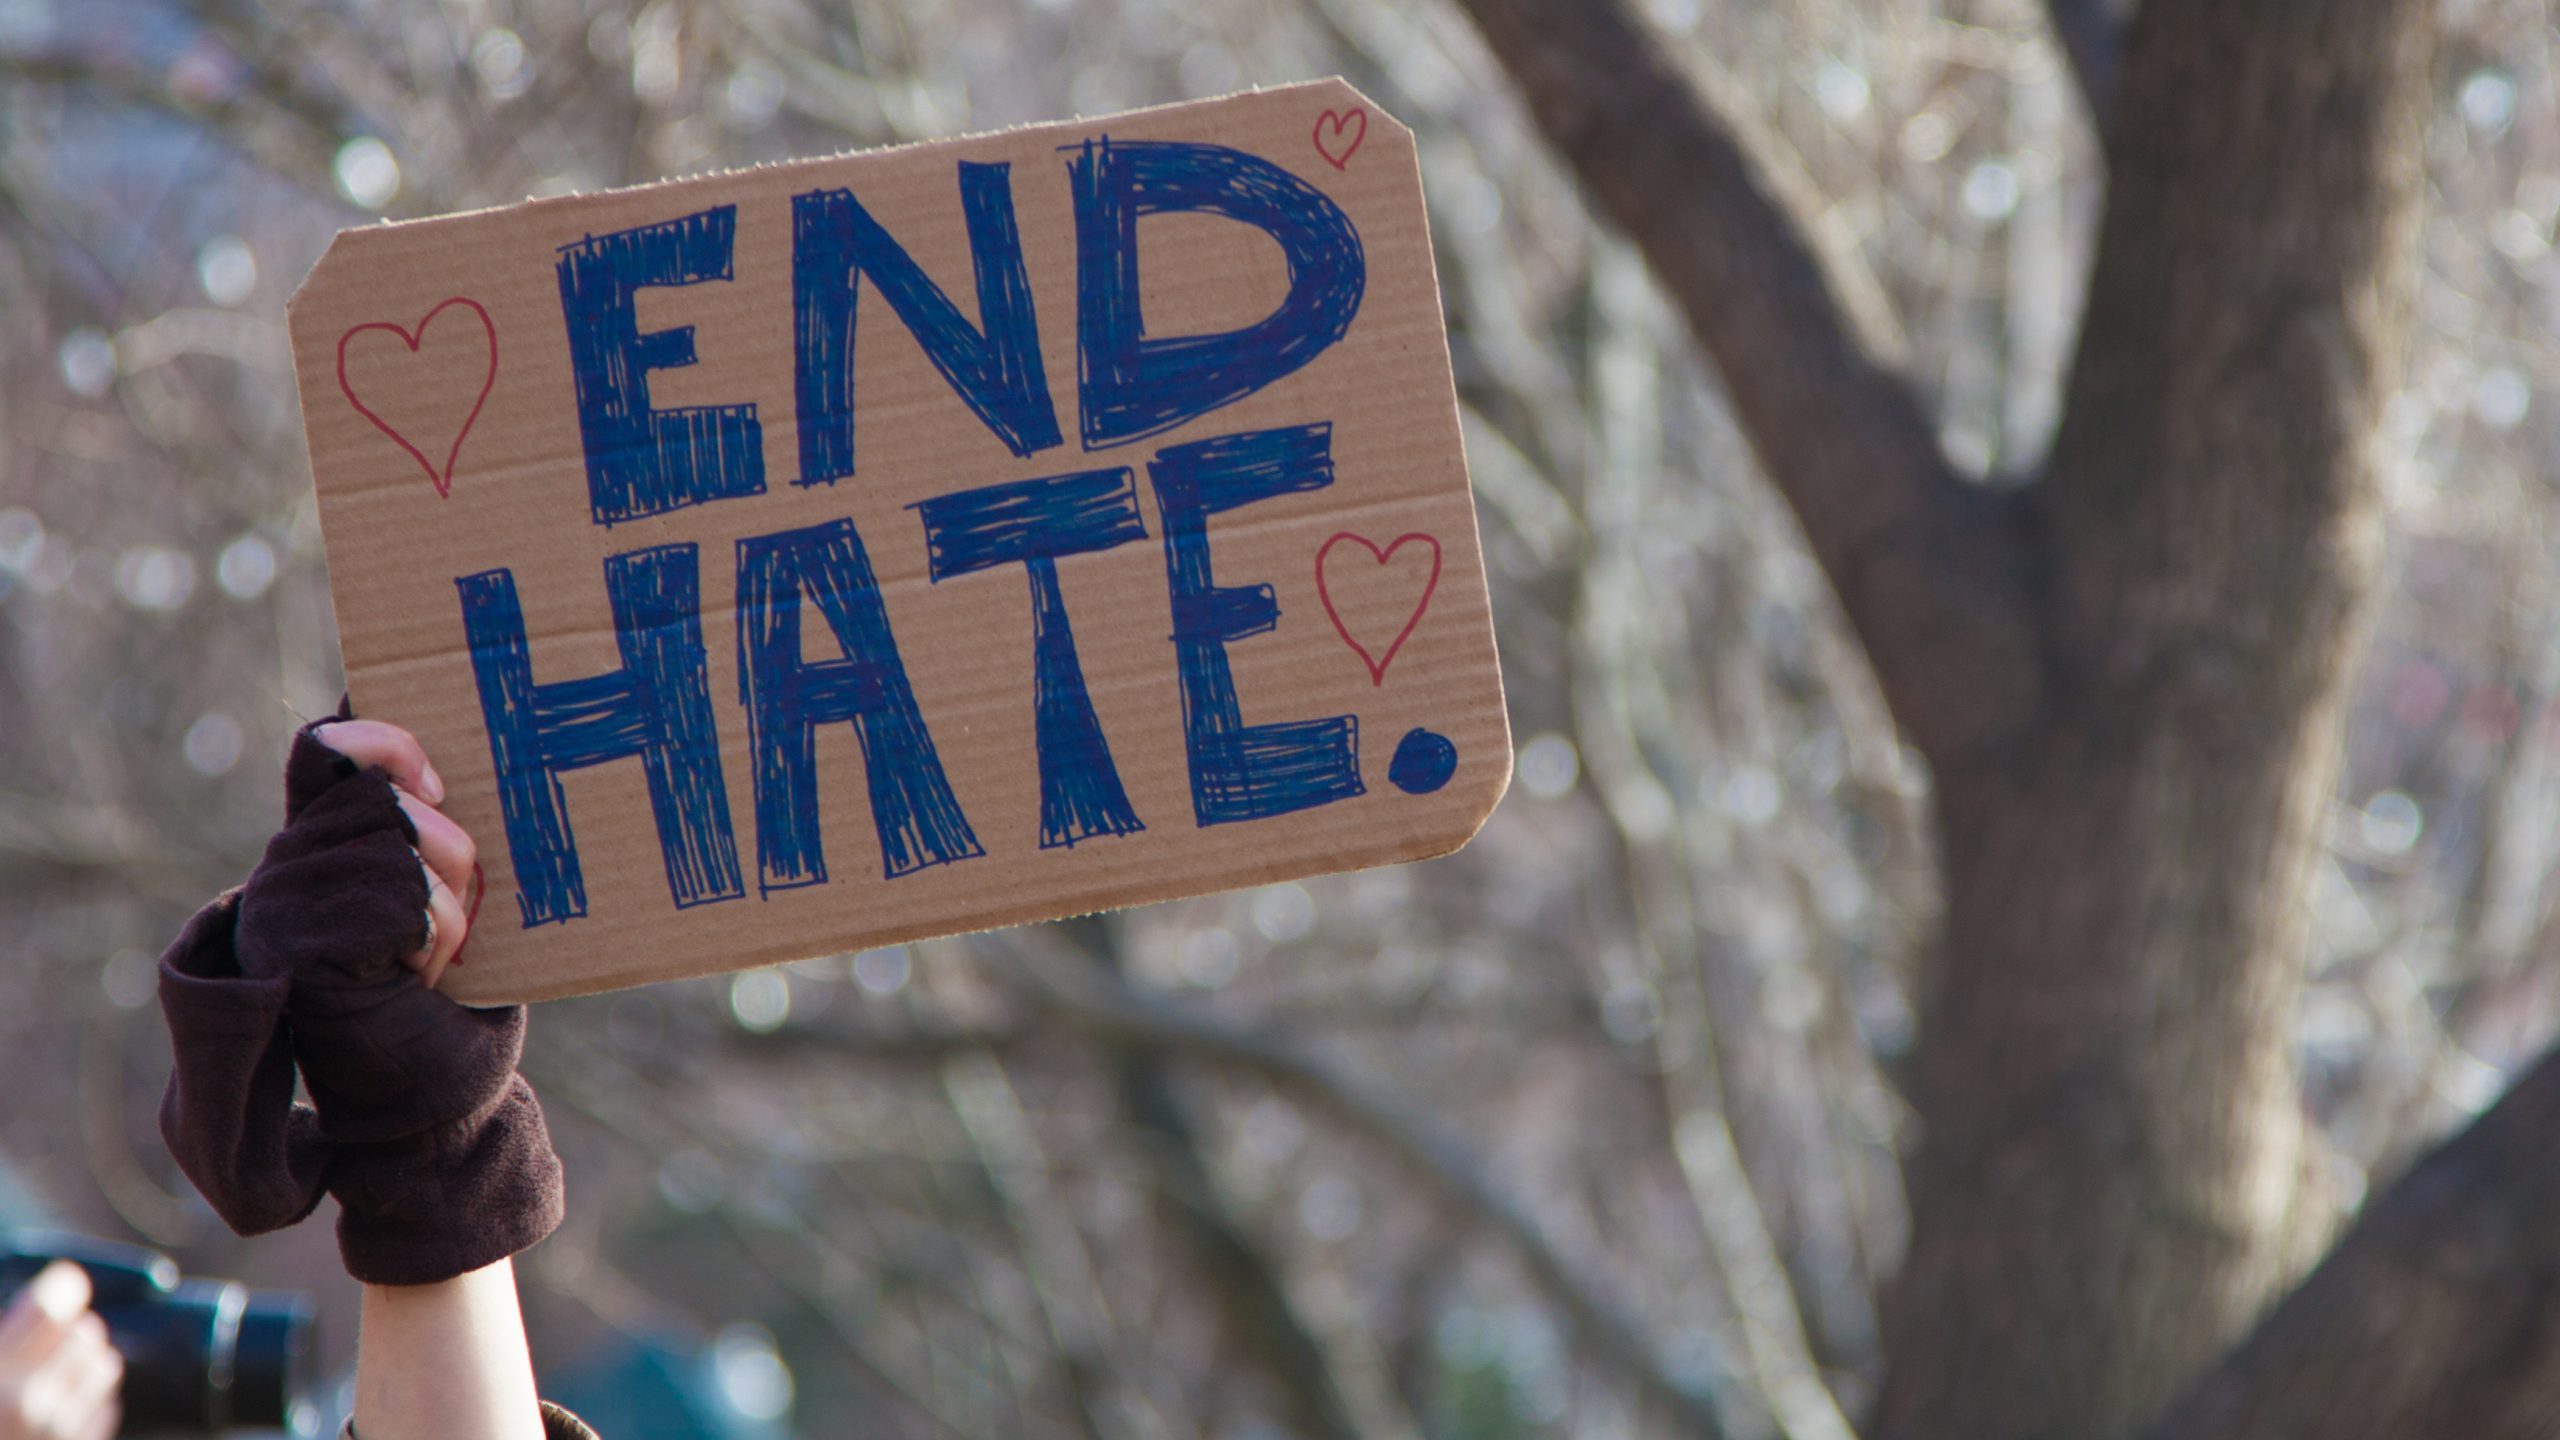 Hand holding sign saying "End Hate"